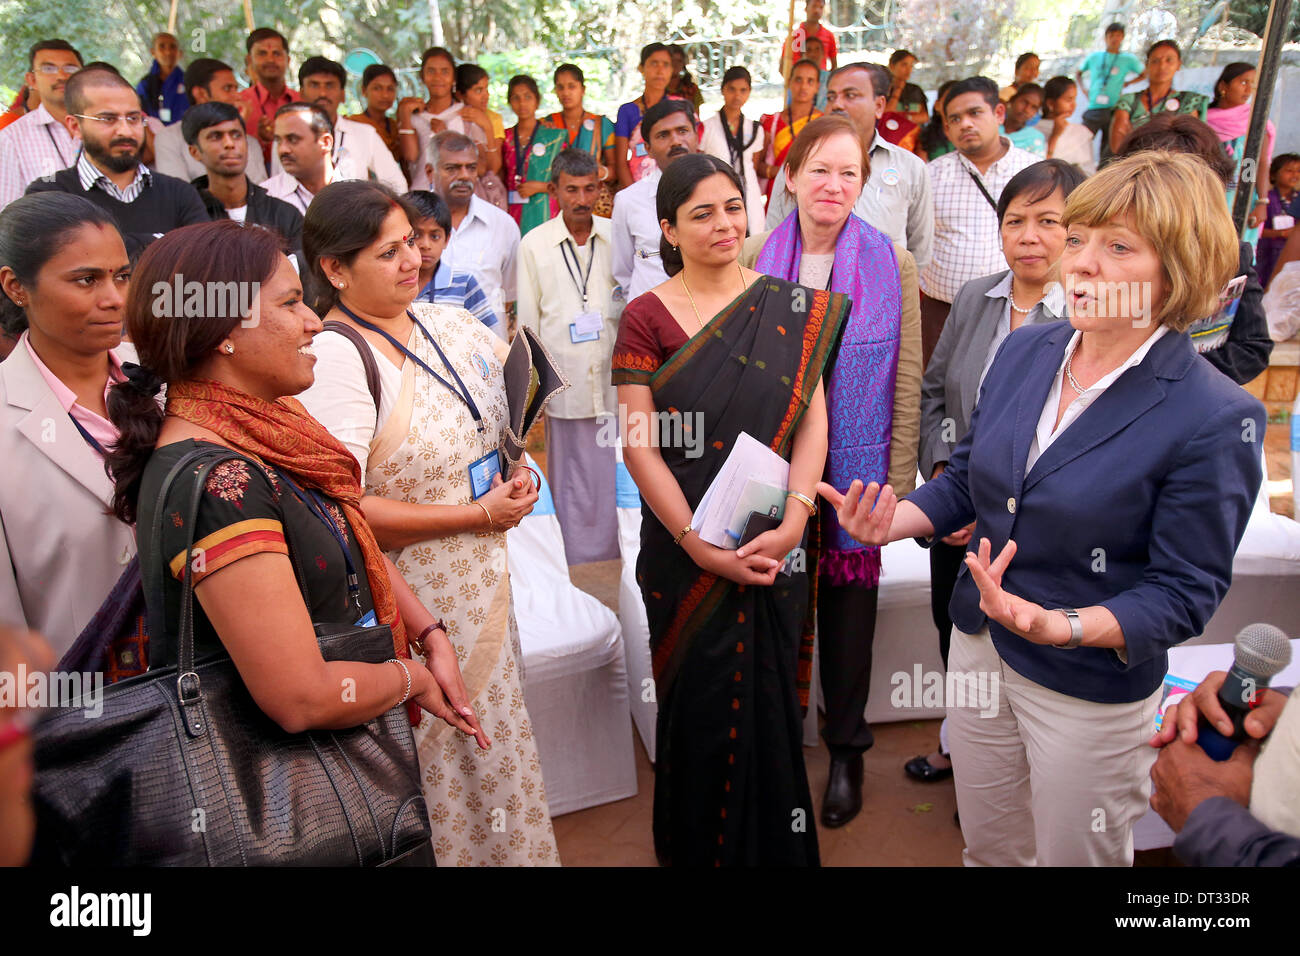 Bangalore, India. 07th Feb, 2014. Partner of German President Gauck (R), Daniela Schadt, visits the UNICEF facility Cubbon Park in Bangalore, India, 07 February 2014. Cubbon Park supervises several projects including one of the German Children's emergency relief to support HIV-infected children and a project against child marriage and trafficking. The German head of state is on a six-day state visit to India. Photo: WOLFGANG KUMM/dpa/Alamy Live News Stock Photo